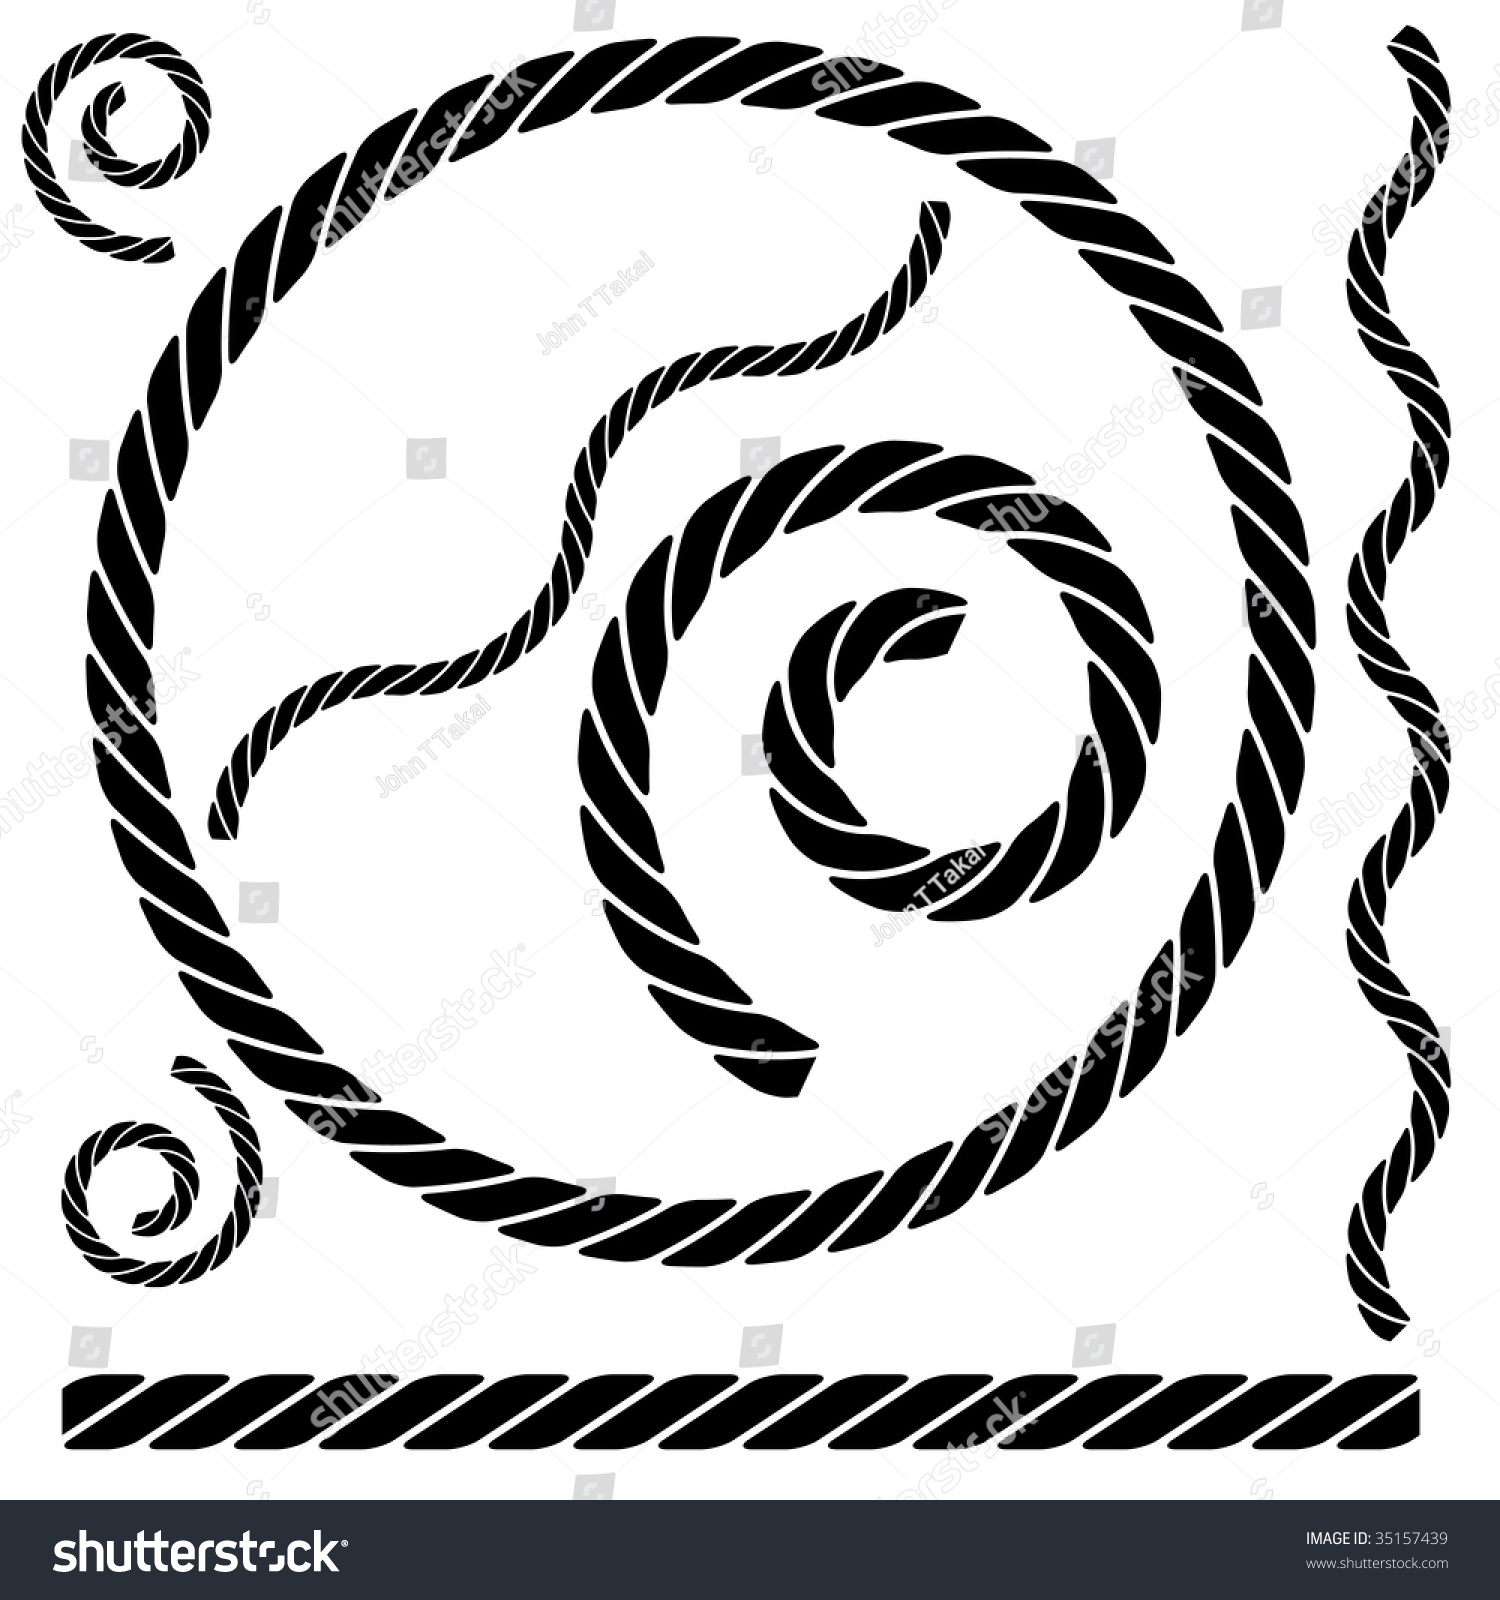 rope clipart vector - photo #8